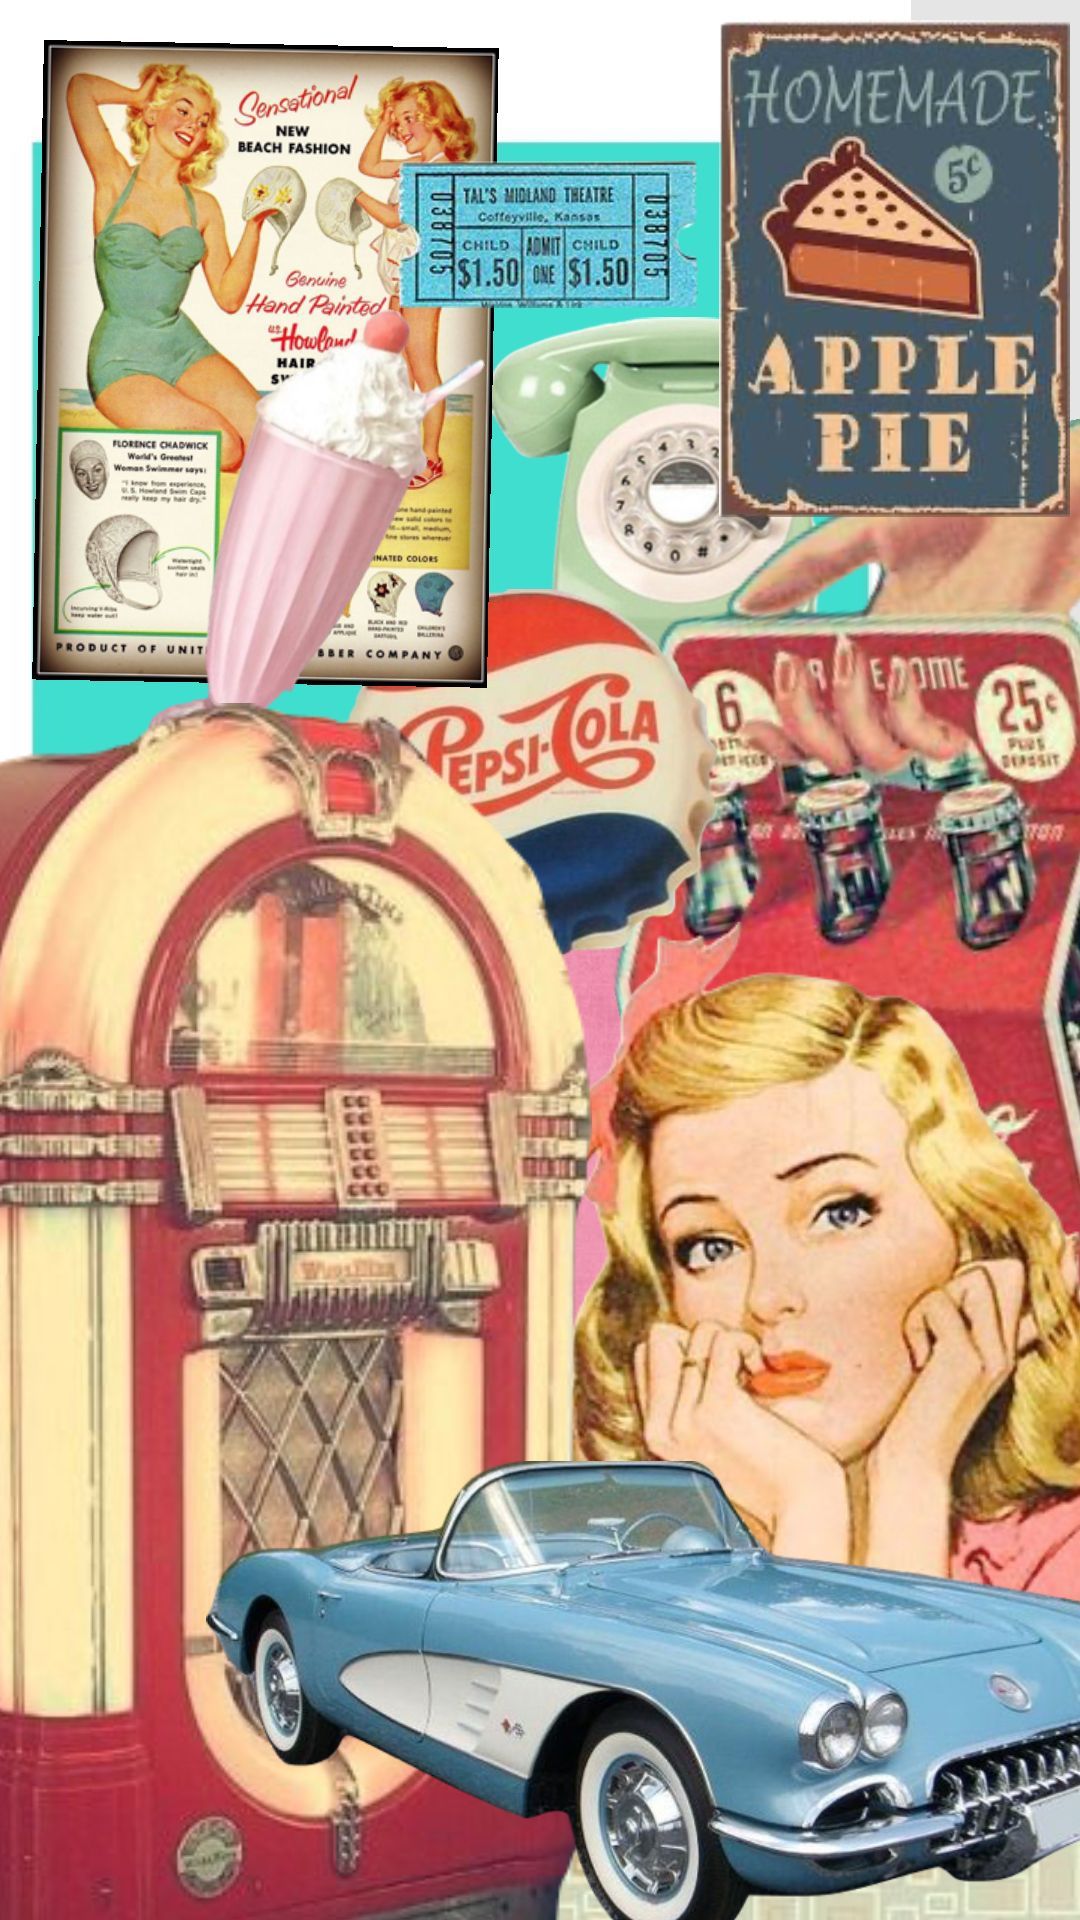 A collage of images from the 1950s including a jukebox, car, and pinup girl. - Retro